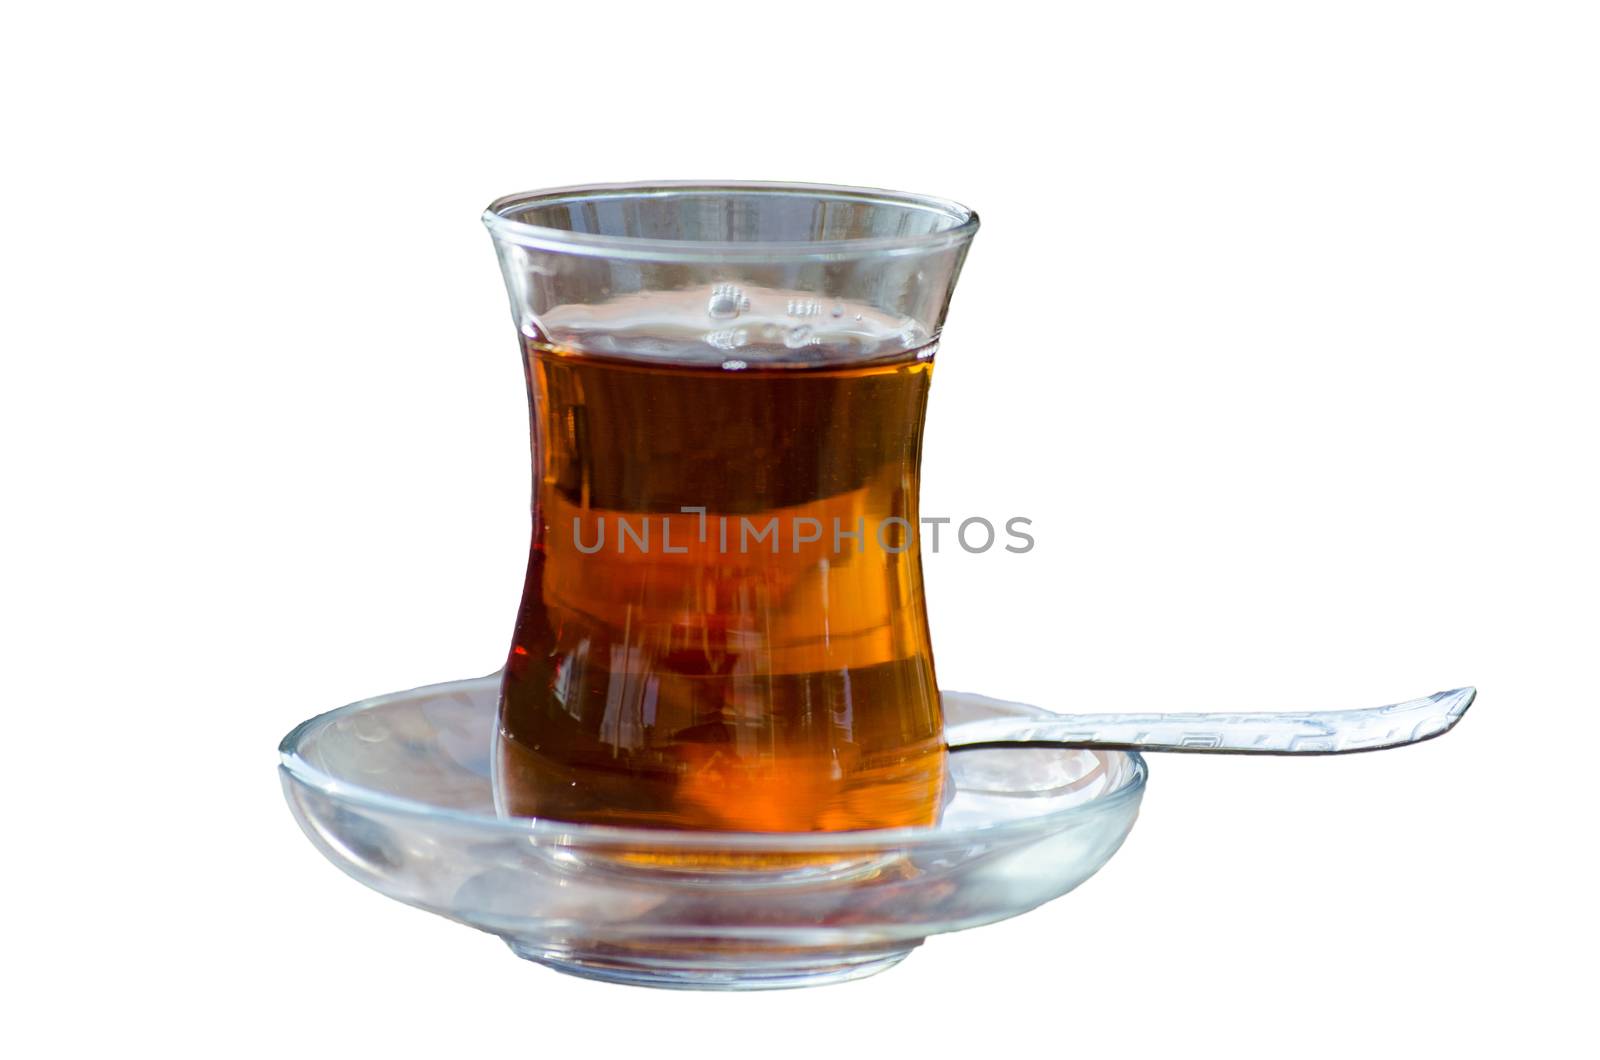 Turkish tea in glass against a white background.